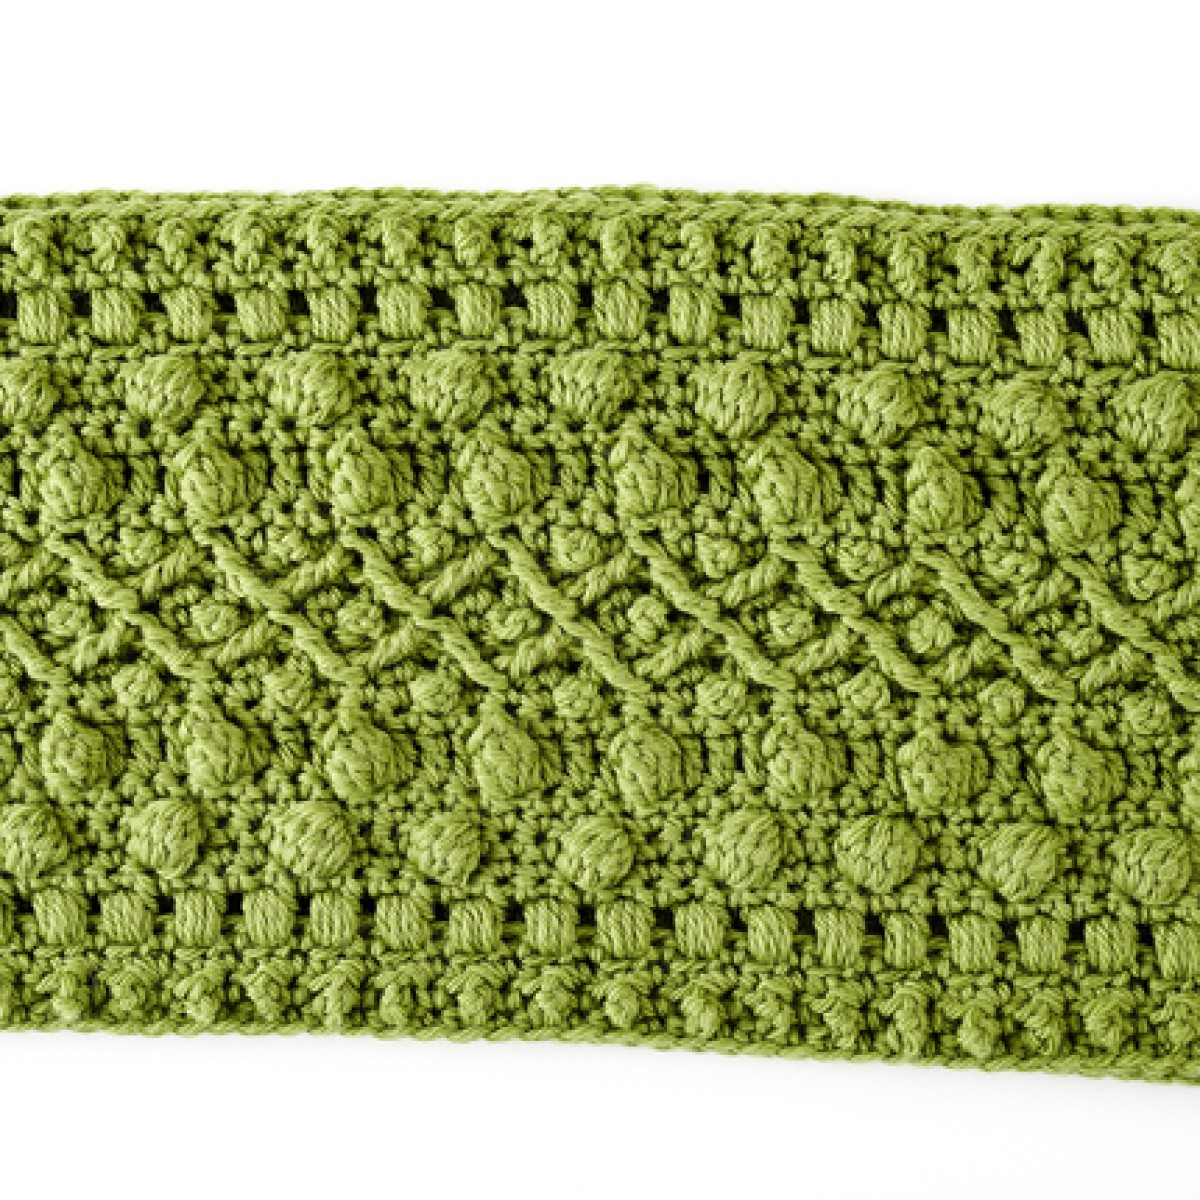 Free Afghan Stitch Crochet Patterns 7 Next Level Crochet Stitches Youll Love